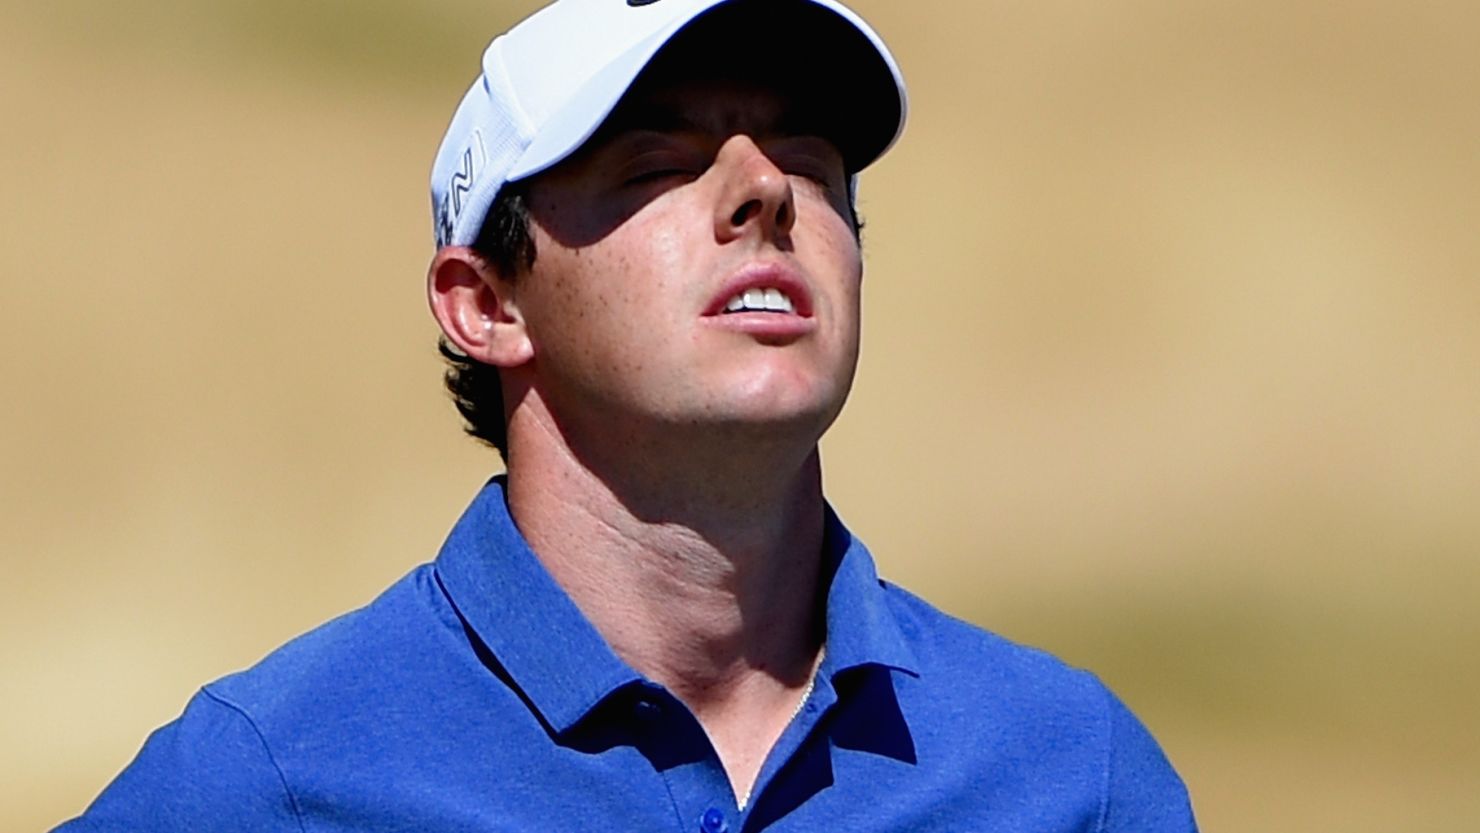  World No. 1 Rory McIlroy will be missing from the field at next week's Open Championship.